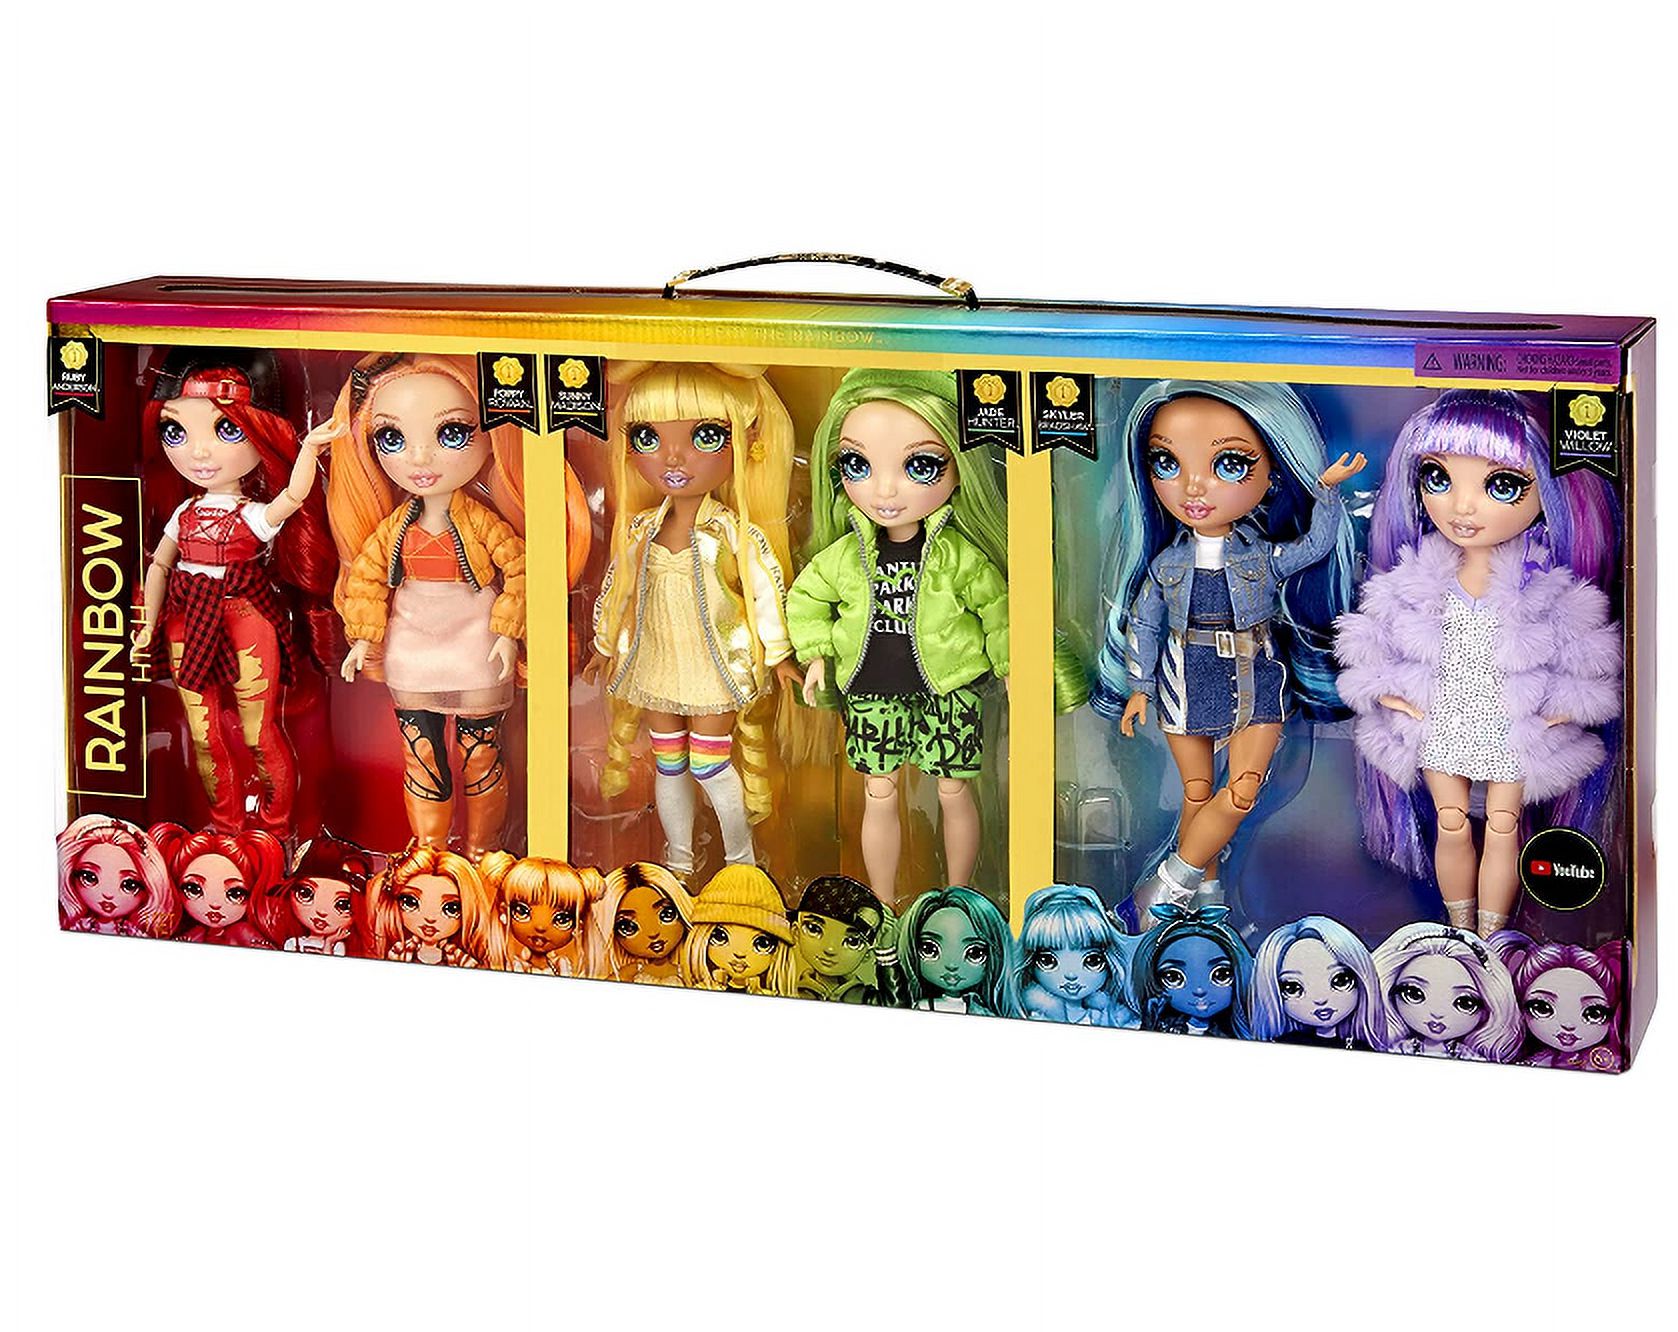 Rainbow High Original Fashion Doll 6-Pack , Violet, Ruby, Sunny, Skyler, Poppy and Jade, 11-inch Poseable Fashion Doll, Includes 6 Outfits, 6 Pairs of Shoes and accessories. Great Gift and Toy for Kid - image 4 of 5